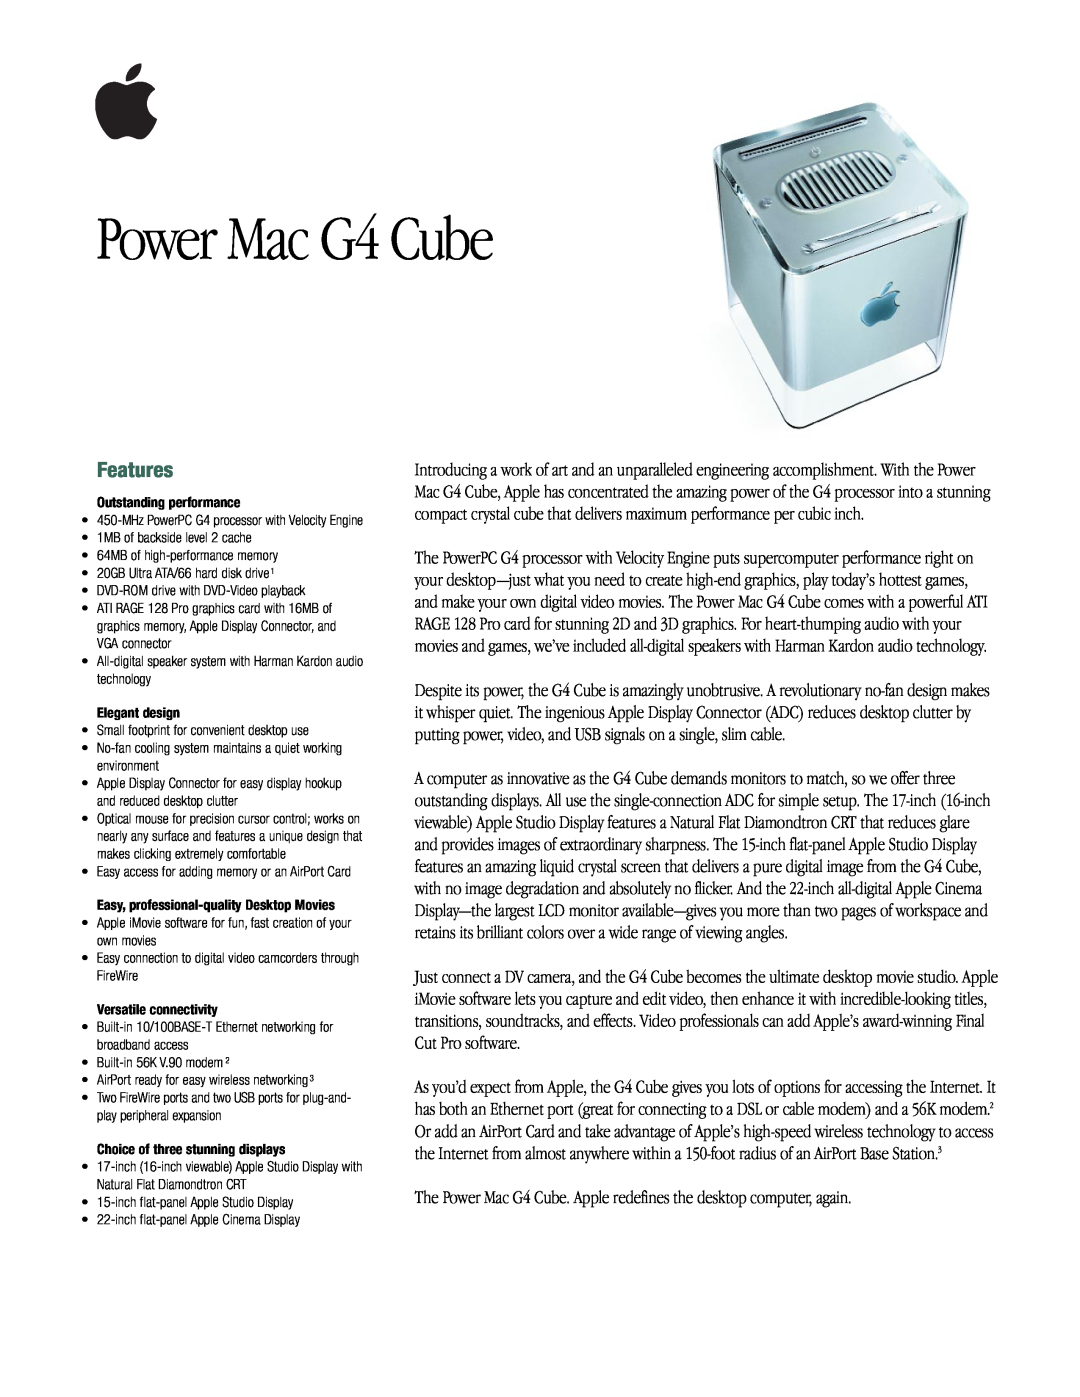 Apple manual Features, The Power Mac G4 Cube. Apple redefines the desktop computer, again 